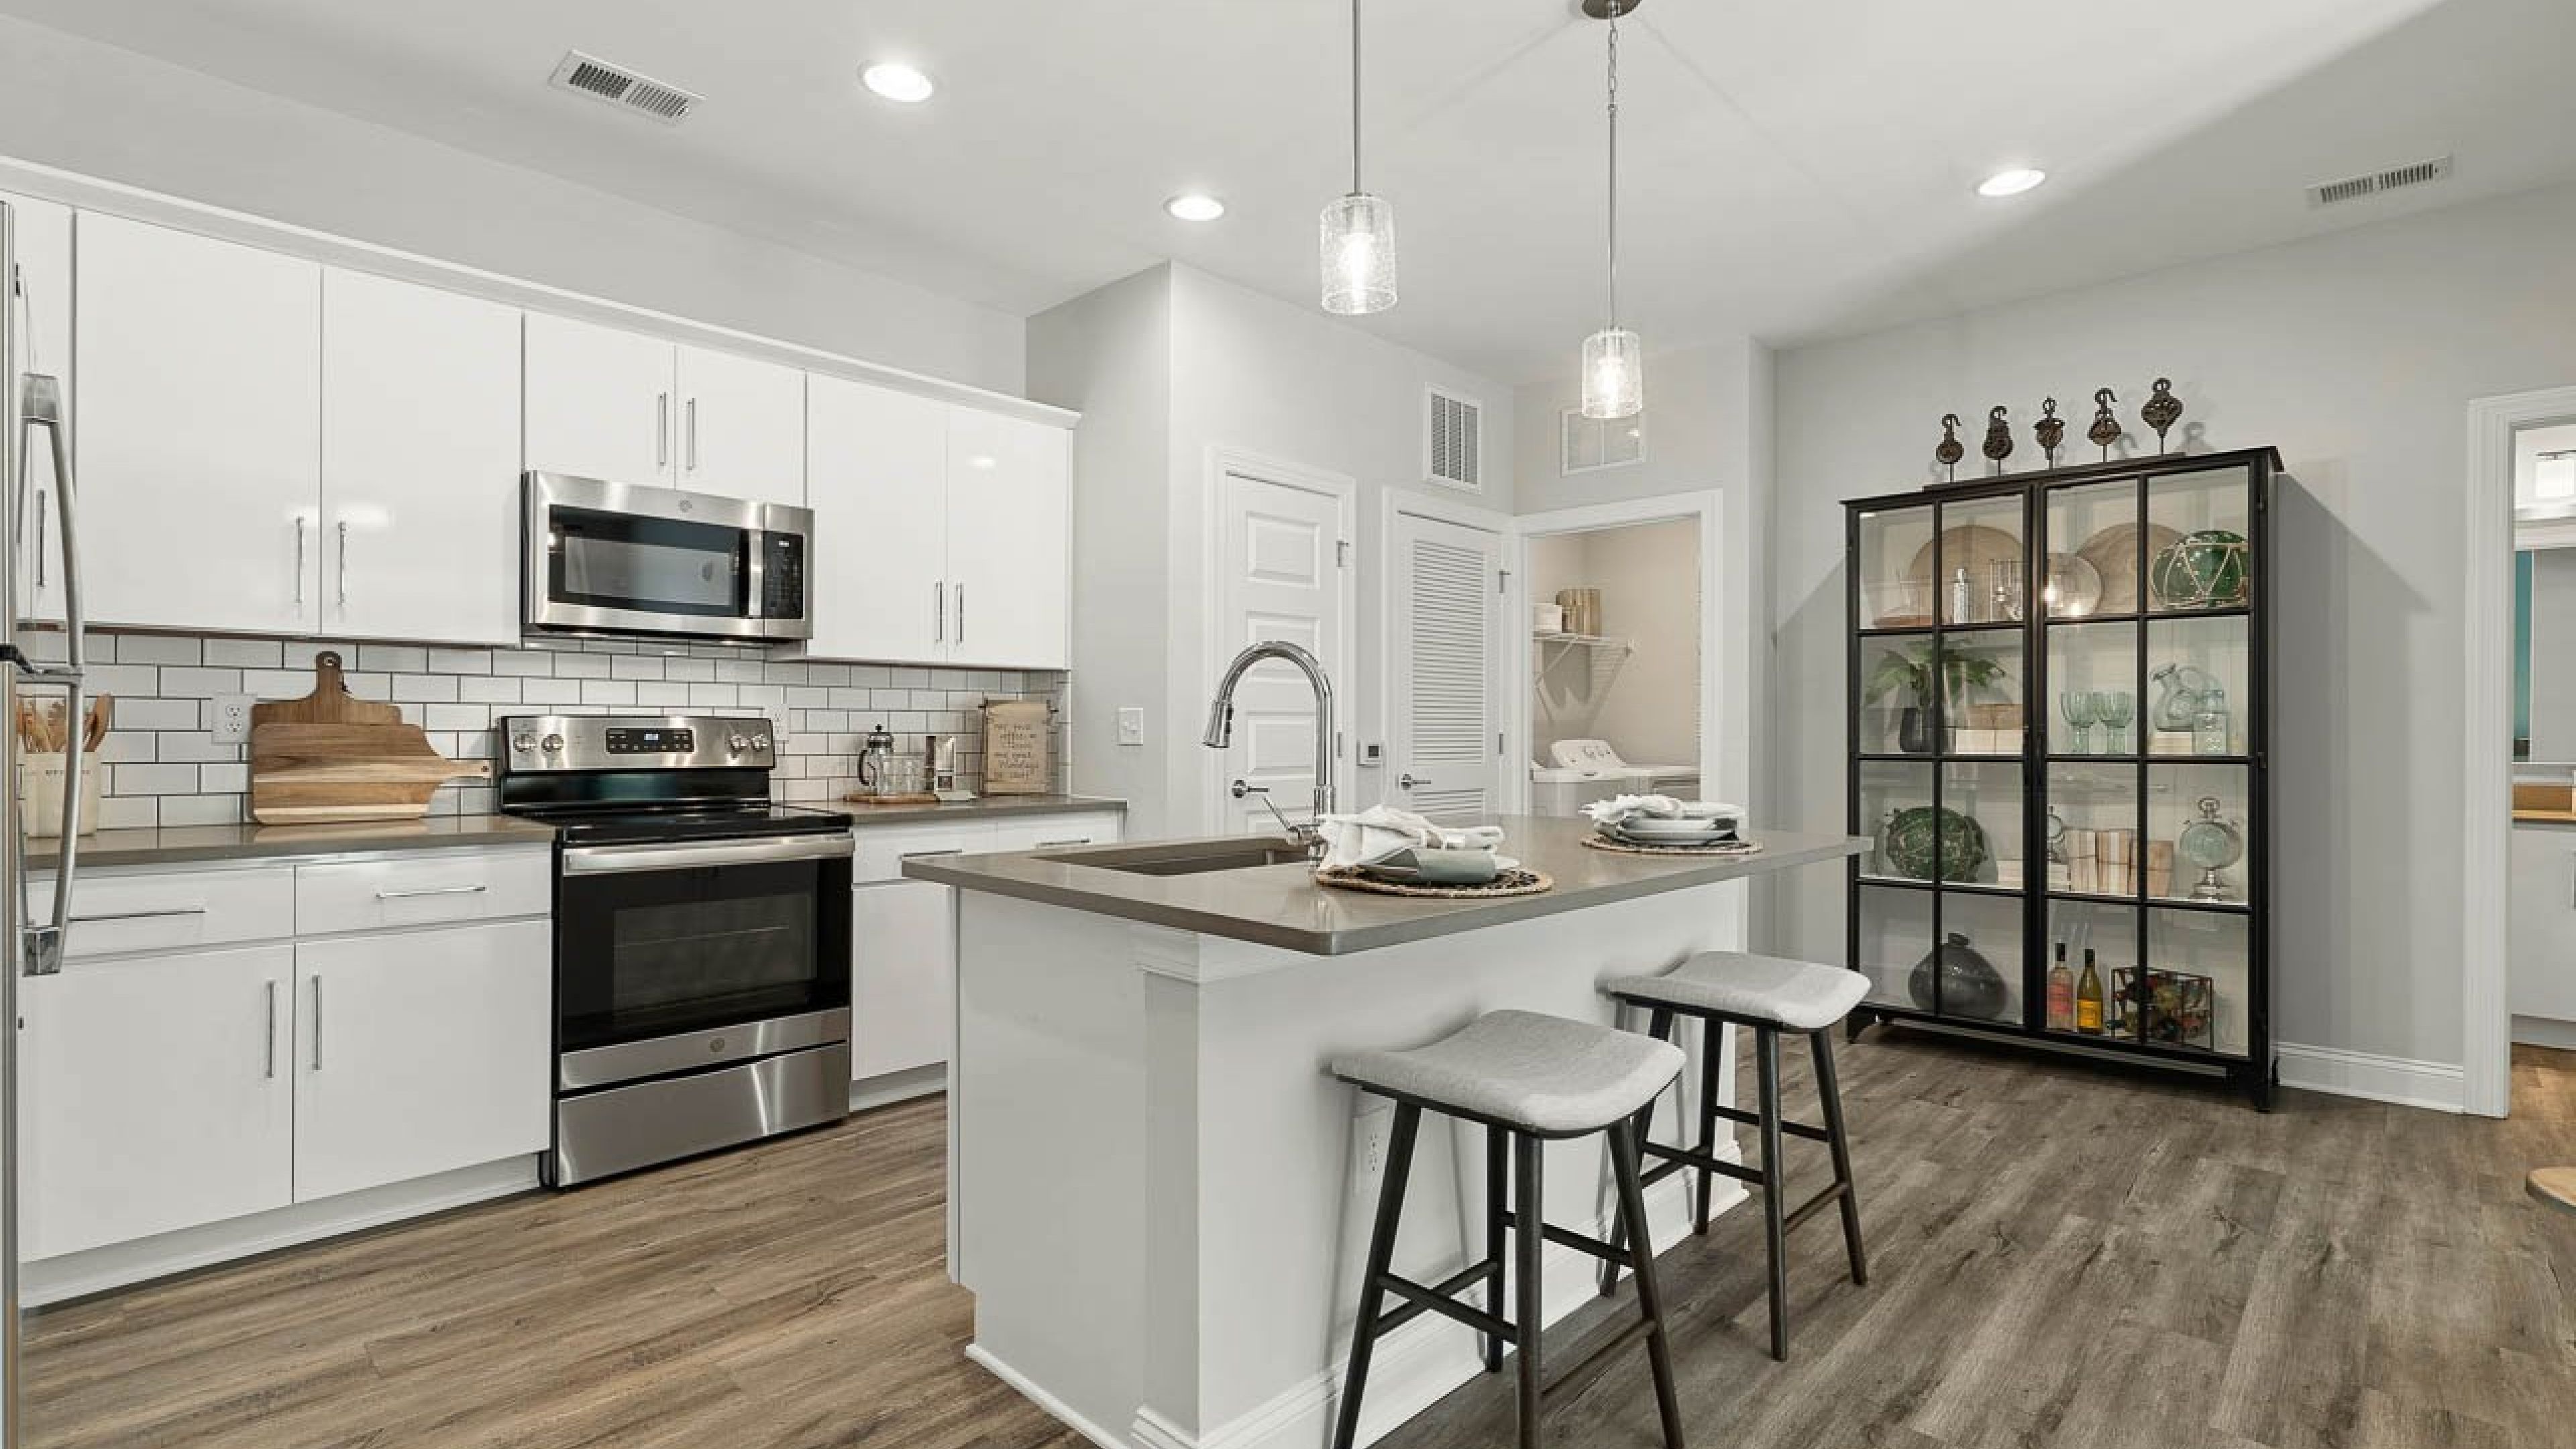 Hawthorne Waterstone apartment beautiful kitchen interior with stainless steel appliances and kitchen island